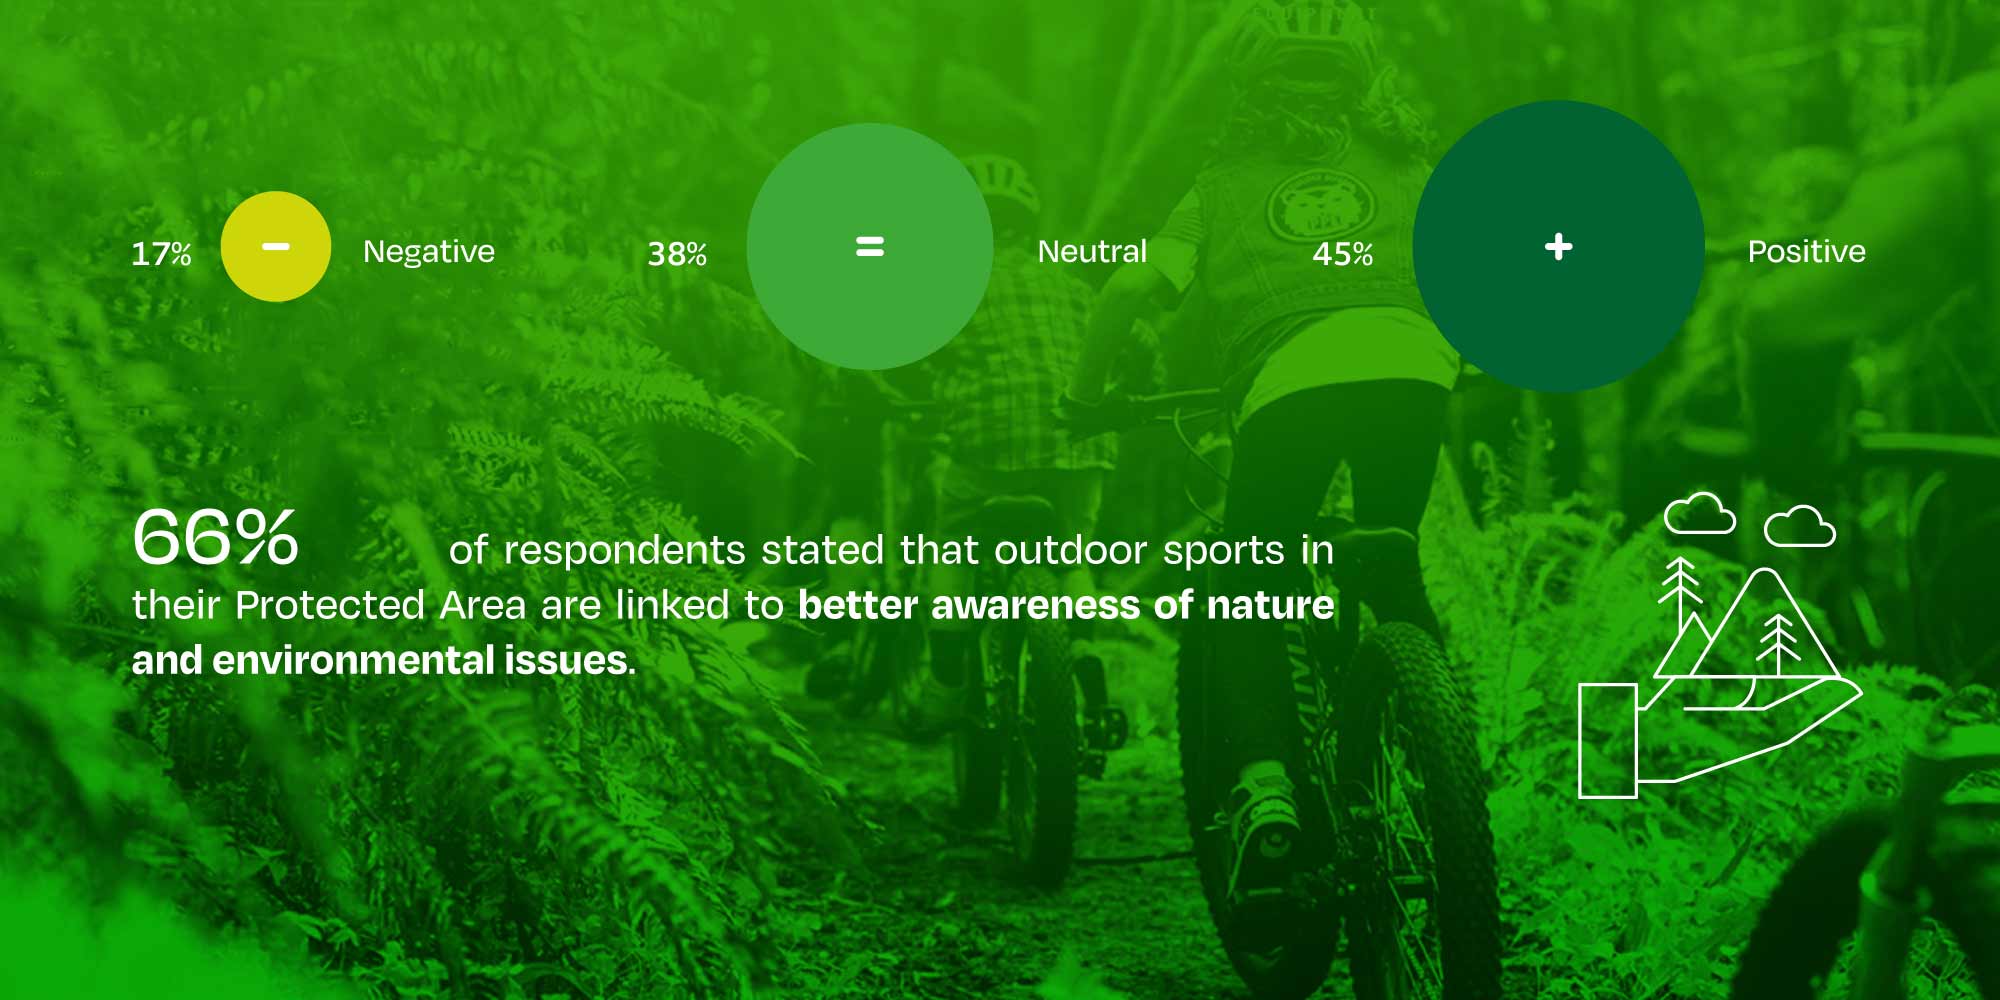 Overall perception of Outdoor Sports in Protected Areas